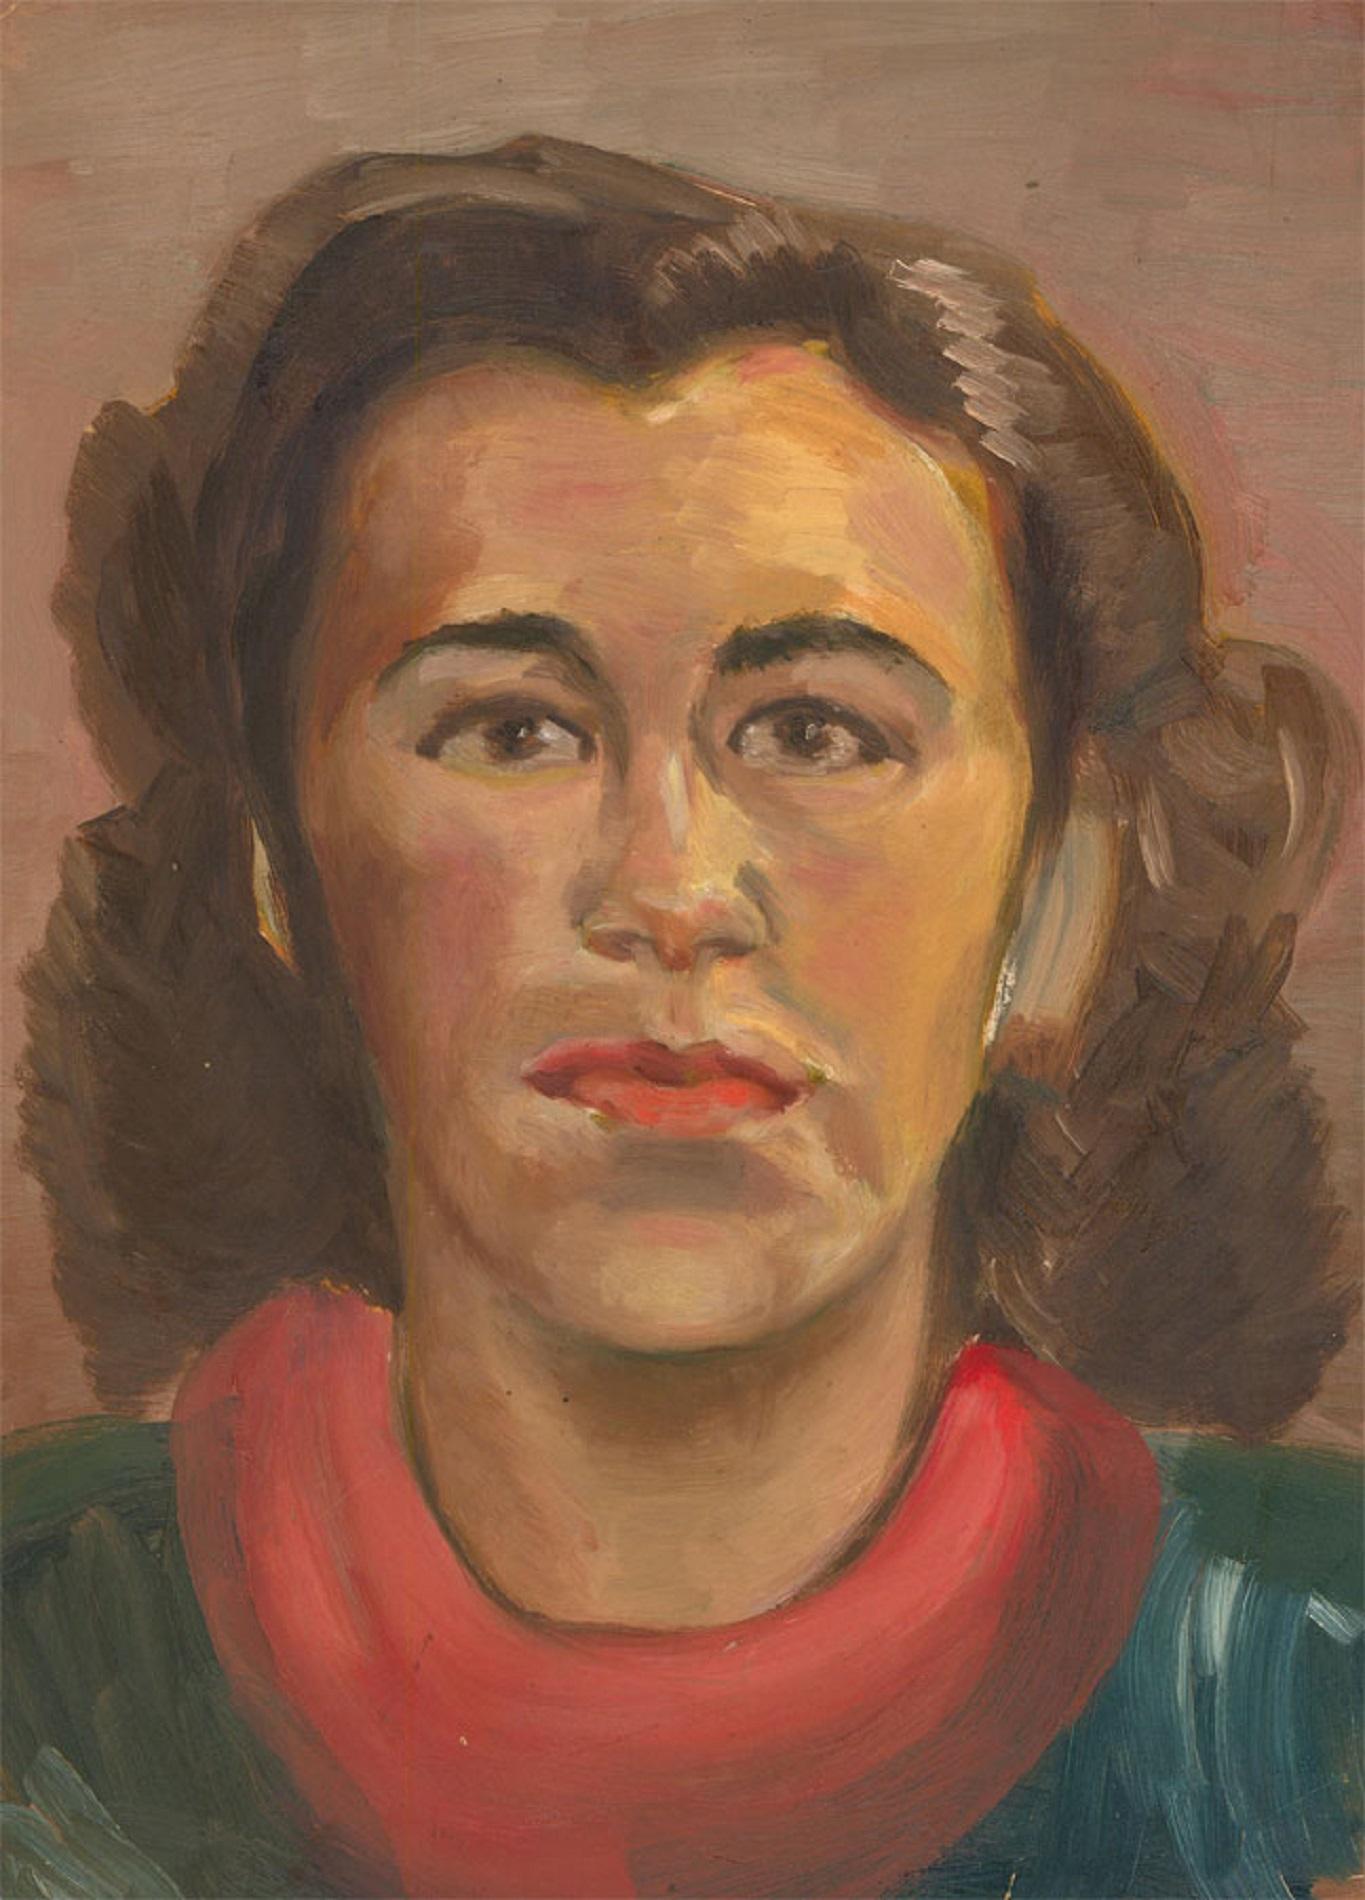 A striking portrait depicting the face of a woman wearing a red scarf and lipstick. Unsigned. On watermarked paper laid to card.